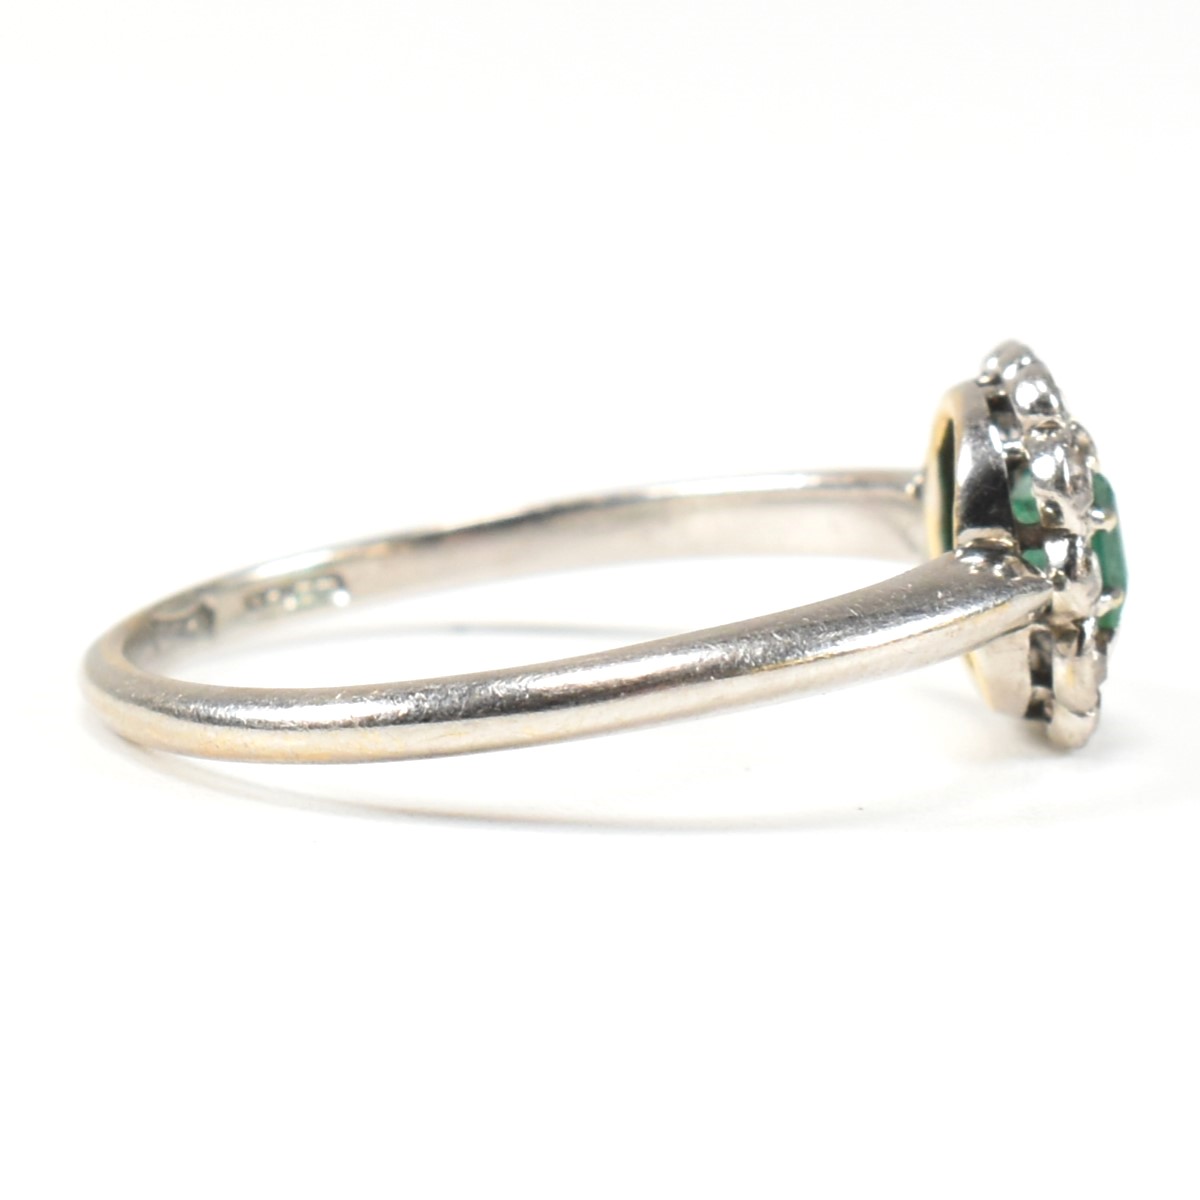 1920S 18CT WHITE GOLD EMERALD & DIAMOND CLUSTER RING - Image 4 of 9